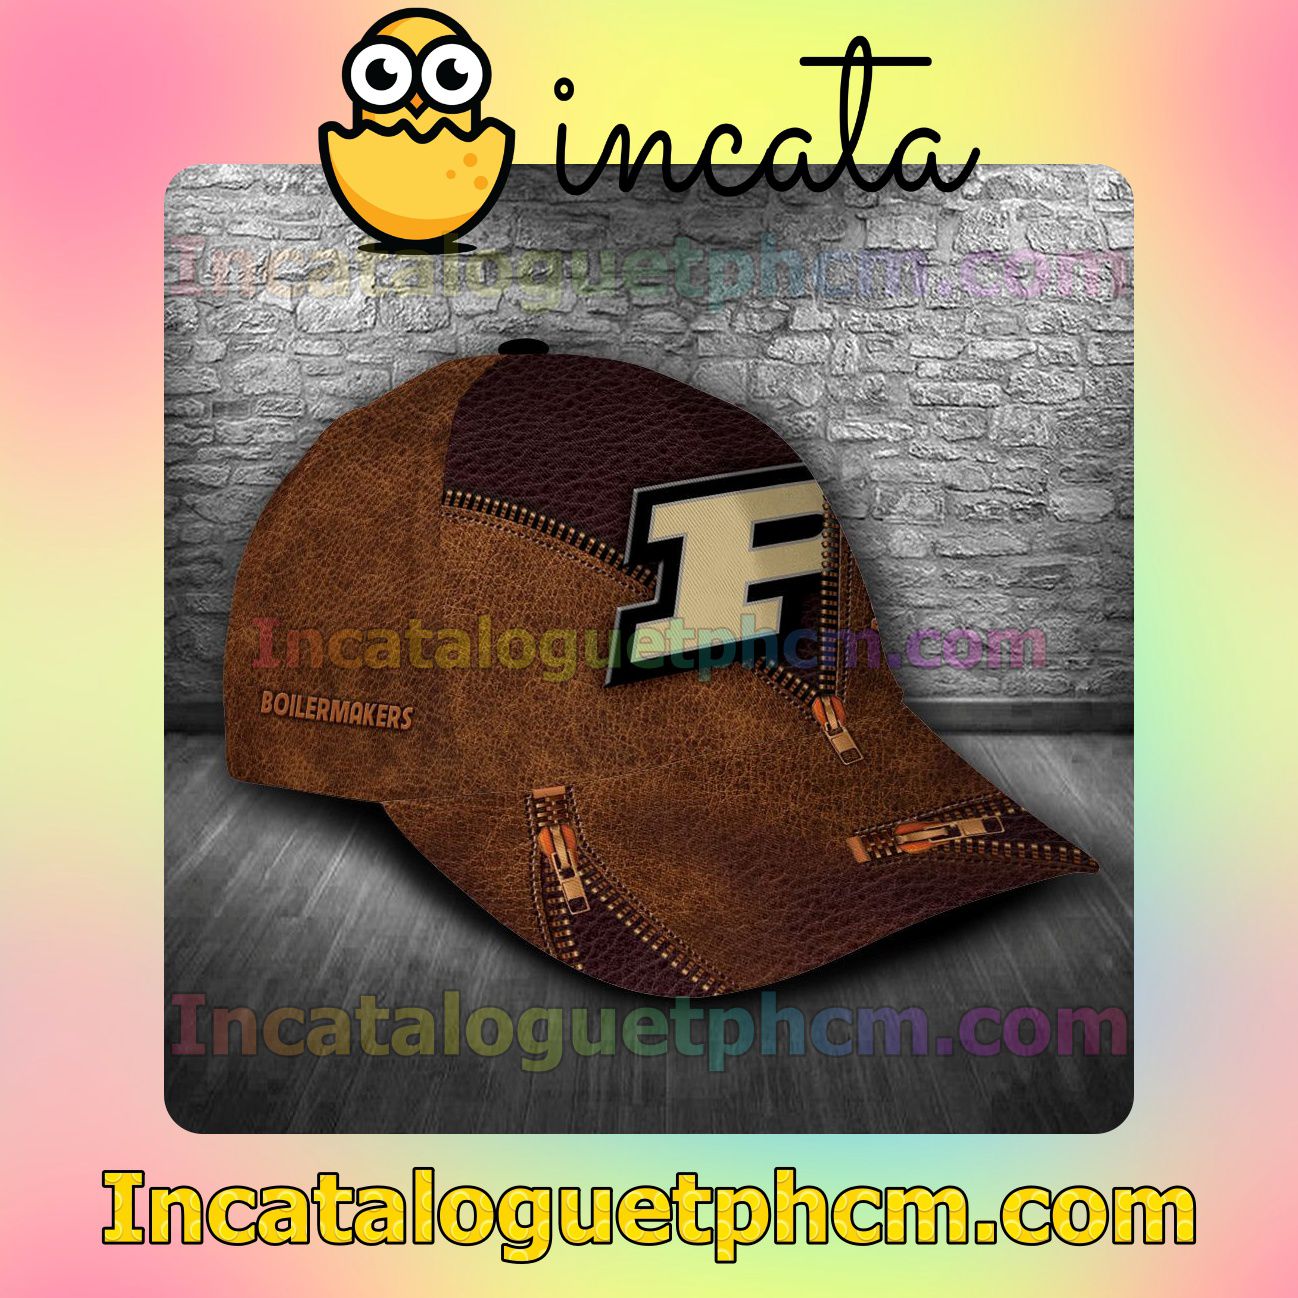 Get Here Purdue Boilermakers Leather Zipper Print Customized Hat Caps